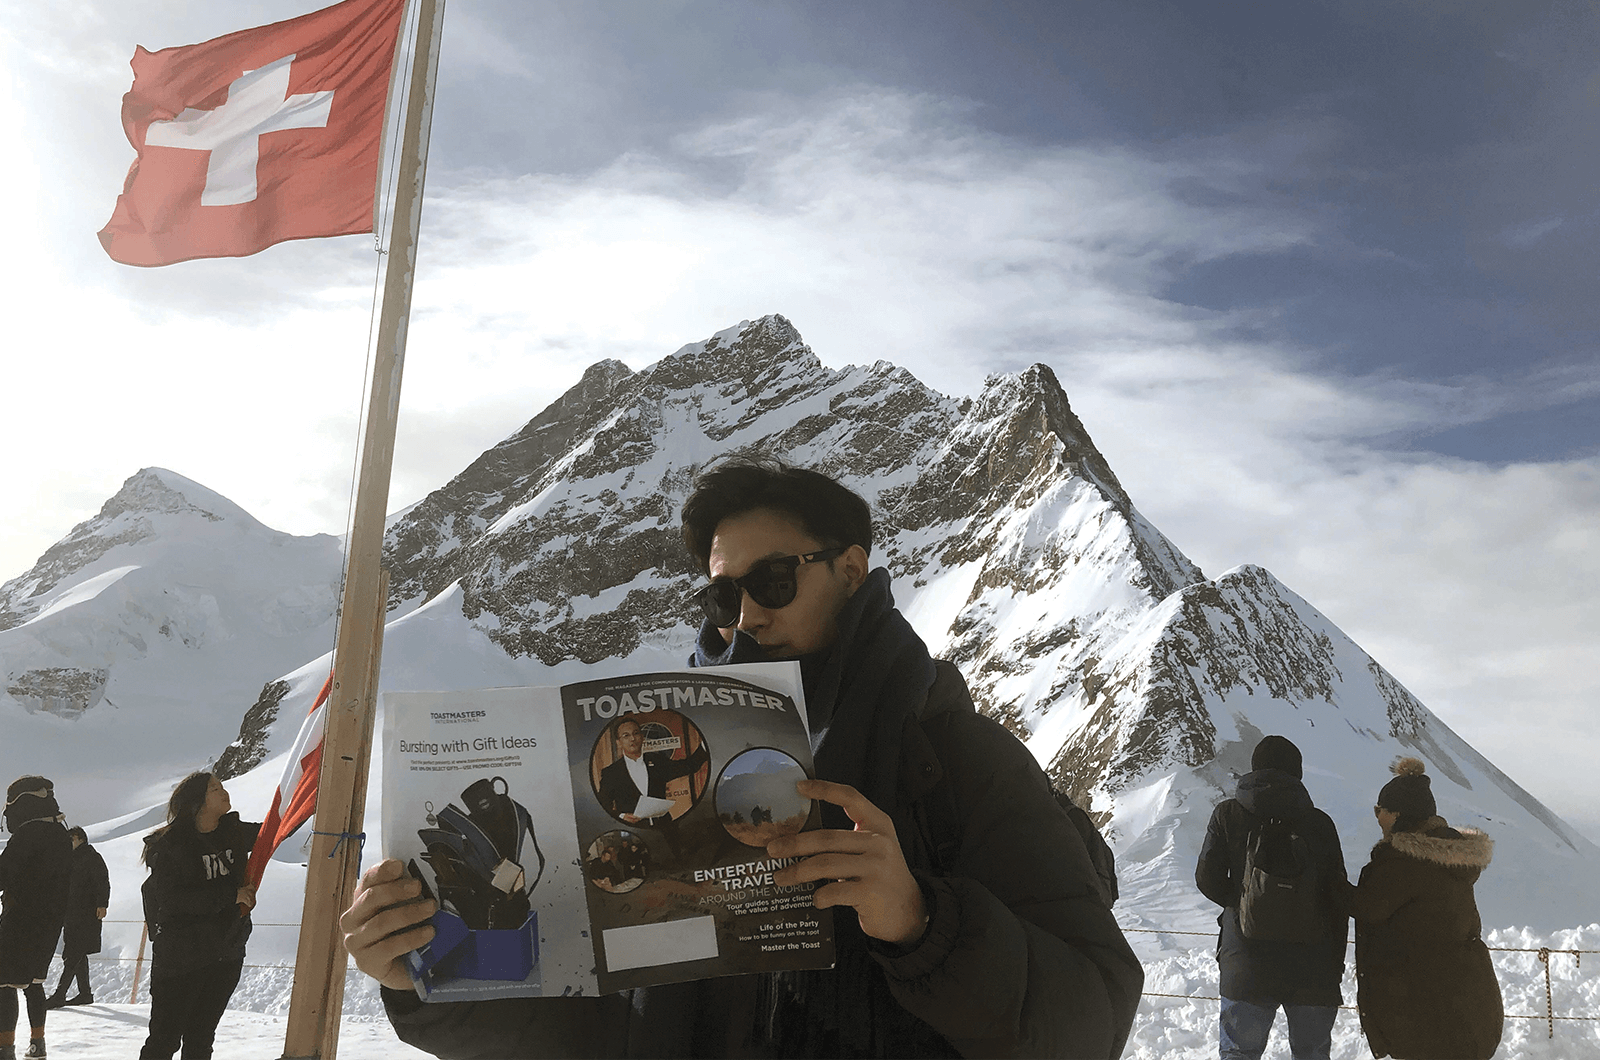 Byungjoo Lee of Seongnam, Korea, reads his Toastmaster in front of Jungfrau, one of the highest summits in the Bernese Alps of western Switzerland.